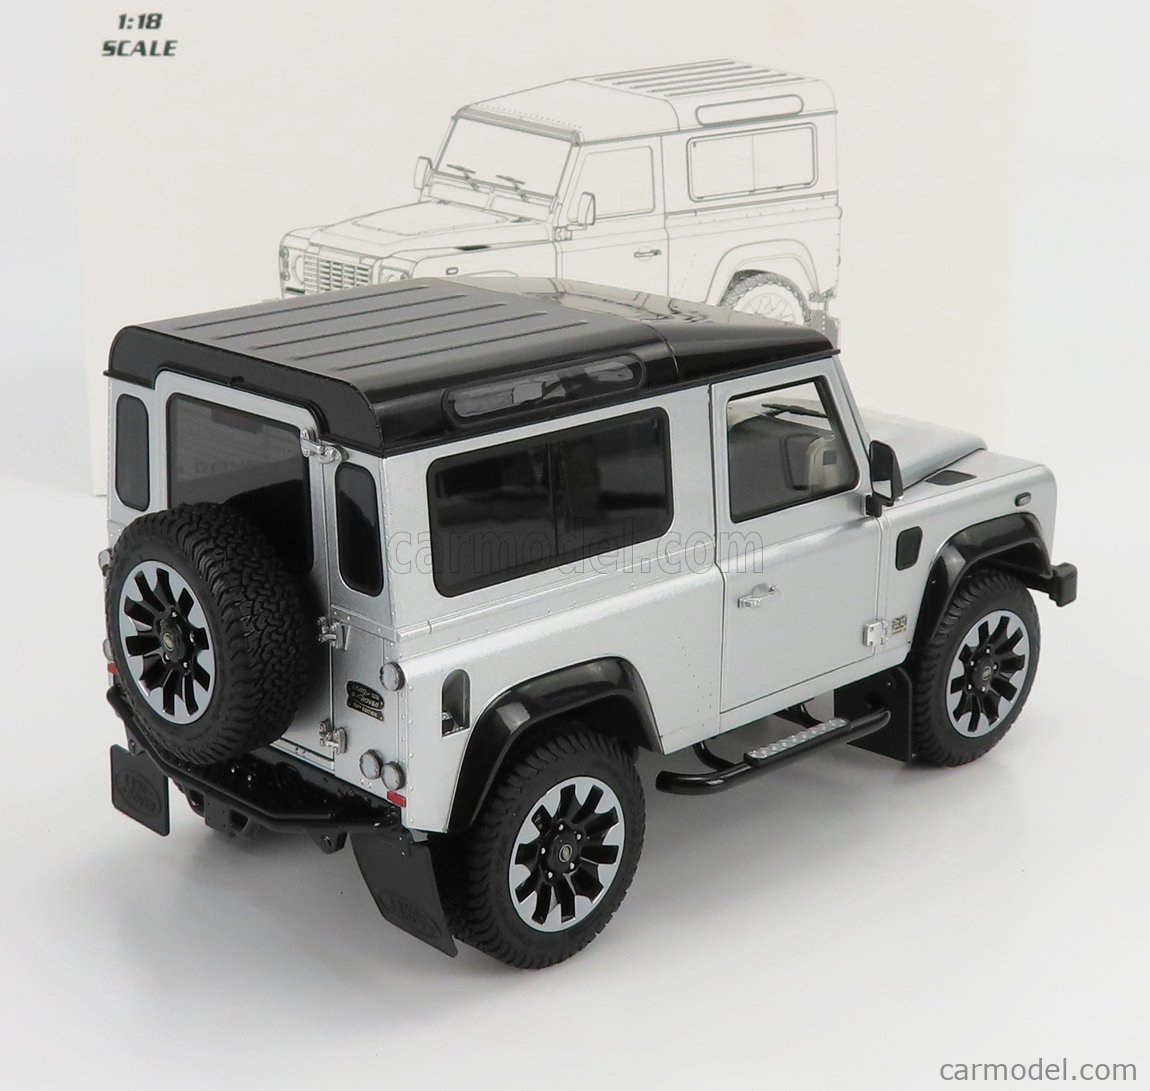 LCD-MODEL LCD18007-Si Масштаб 1/18  LAND ROVER DEFENDER 90 WORKS V8 70th EDITION 2018 SILVER